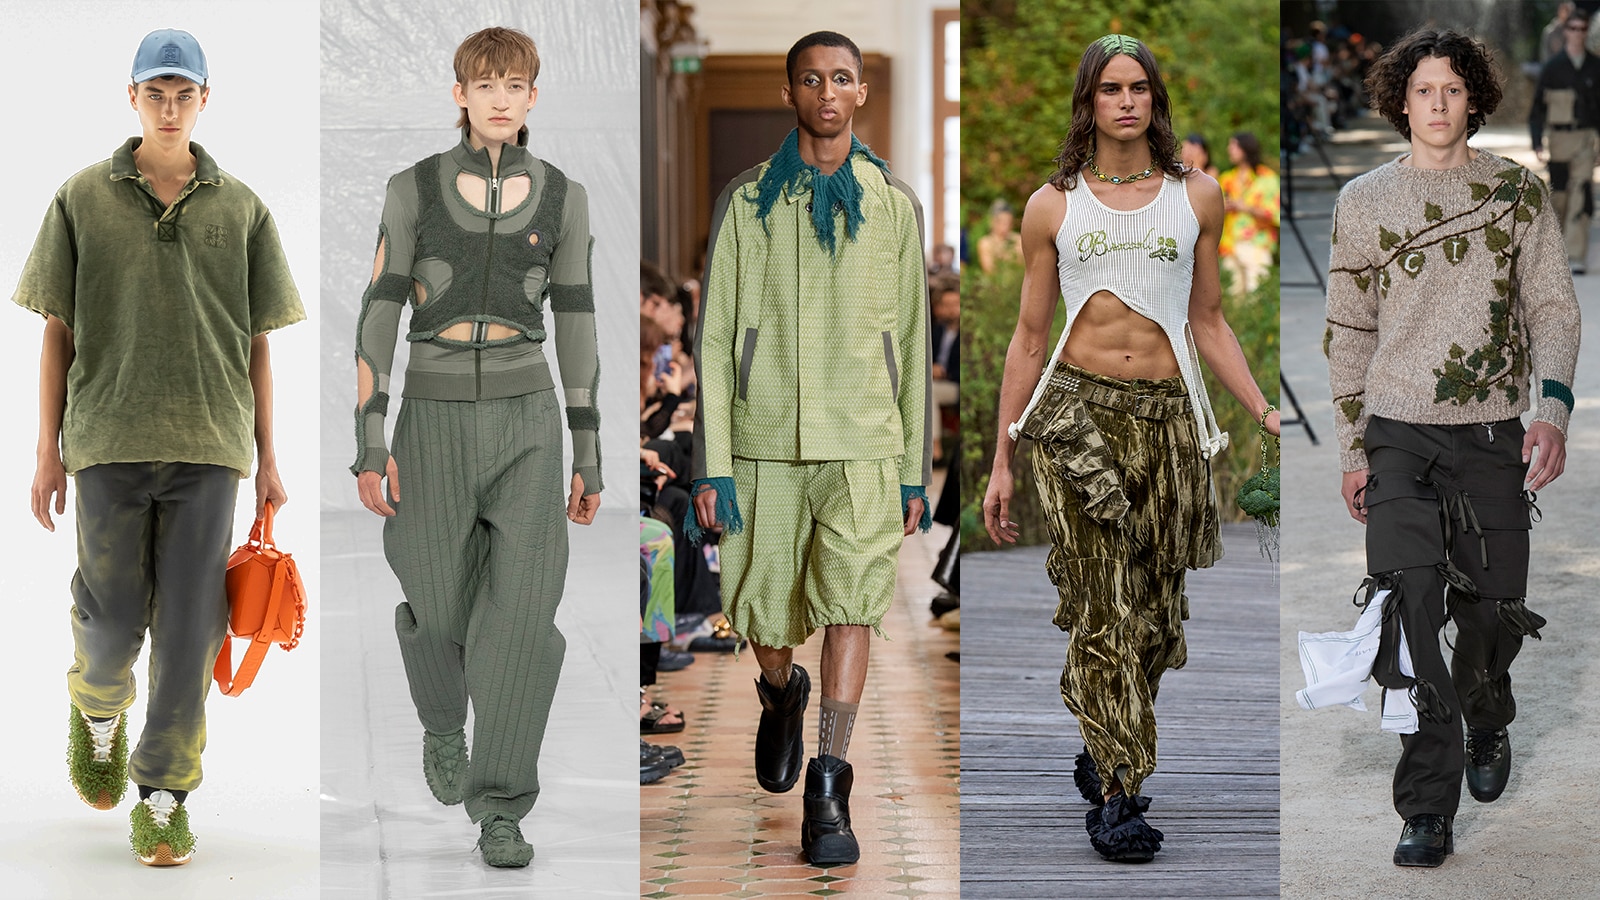 Fashion: Why Shrek Is The Fashion Muse Of The 2020s